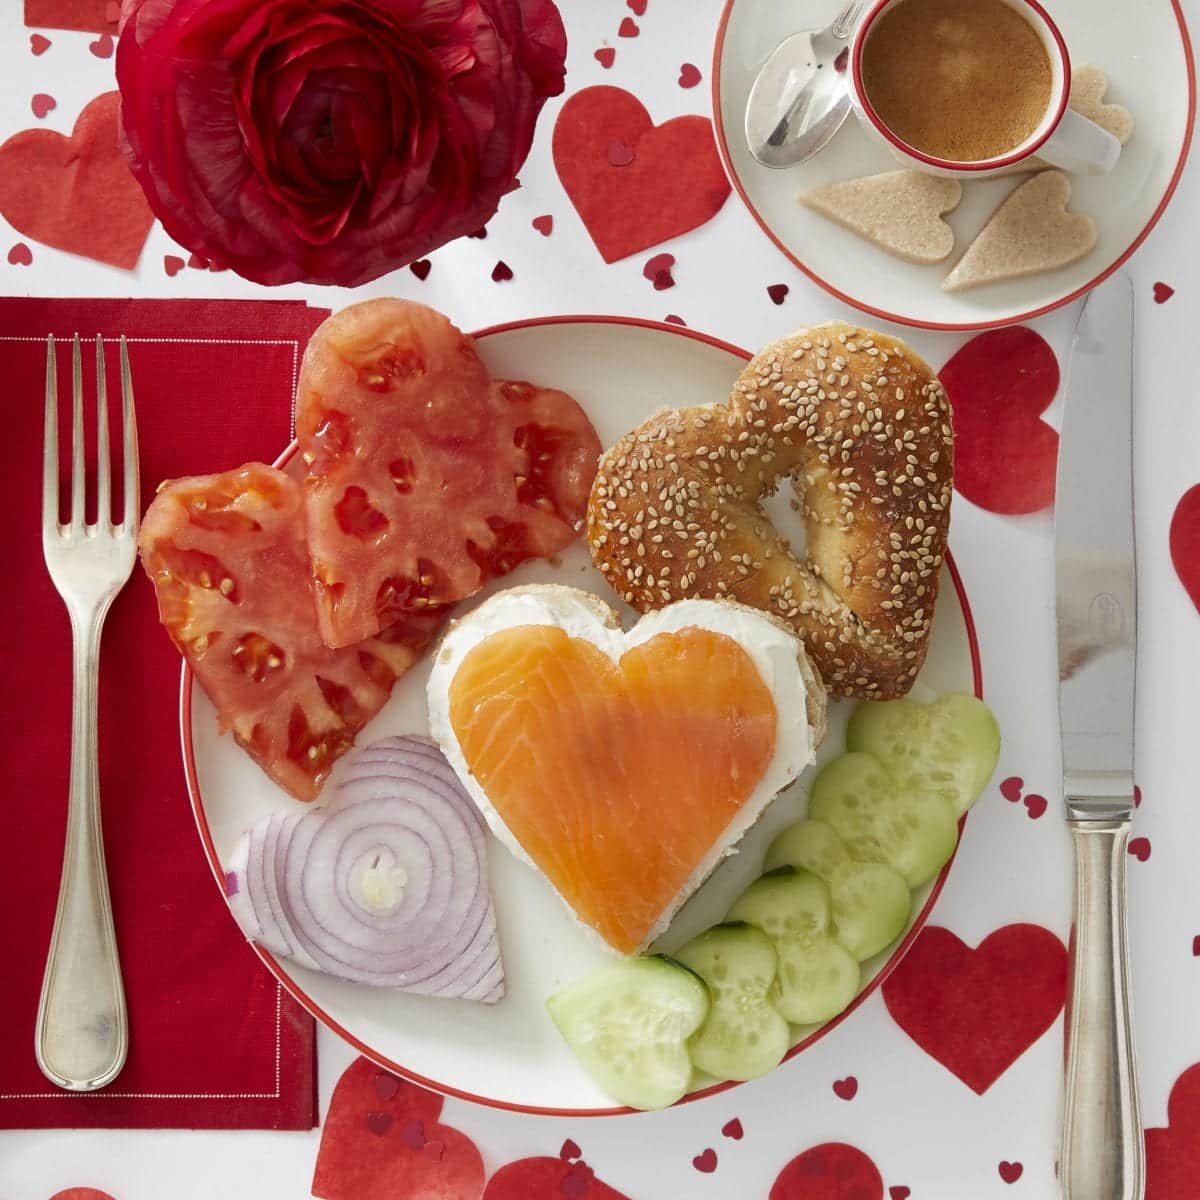 Darcy Miller Designs, Bagel Breakfast, Bagel, cookie cutter, valentines, heart-shaped, lox, cream cheese, cucumber, onion, tomato, bagel bar, brunch, cut out shape, Darcy Miller, DIY